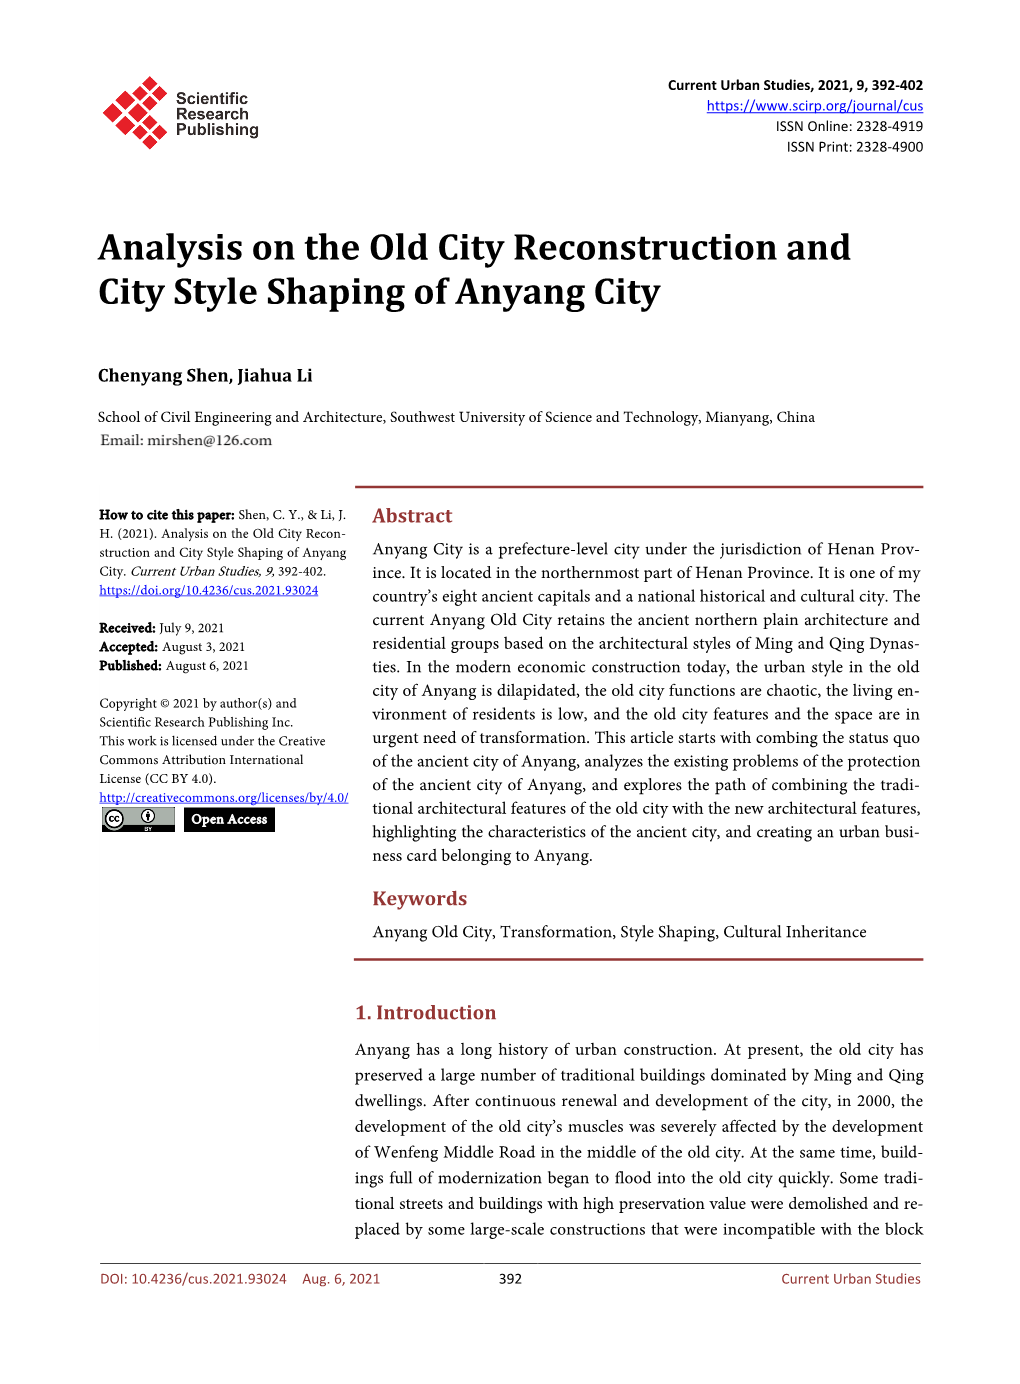 Analysis on the Old City Reconstruction and City Style Shaping of Anyang City